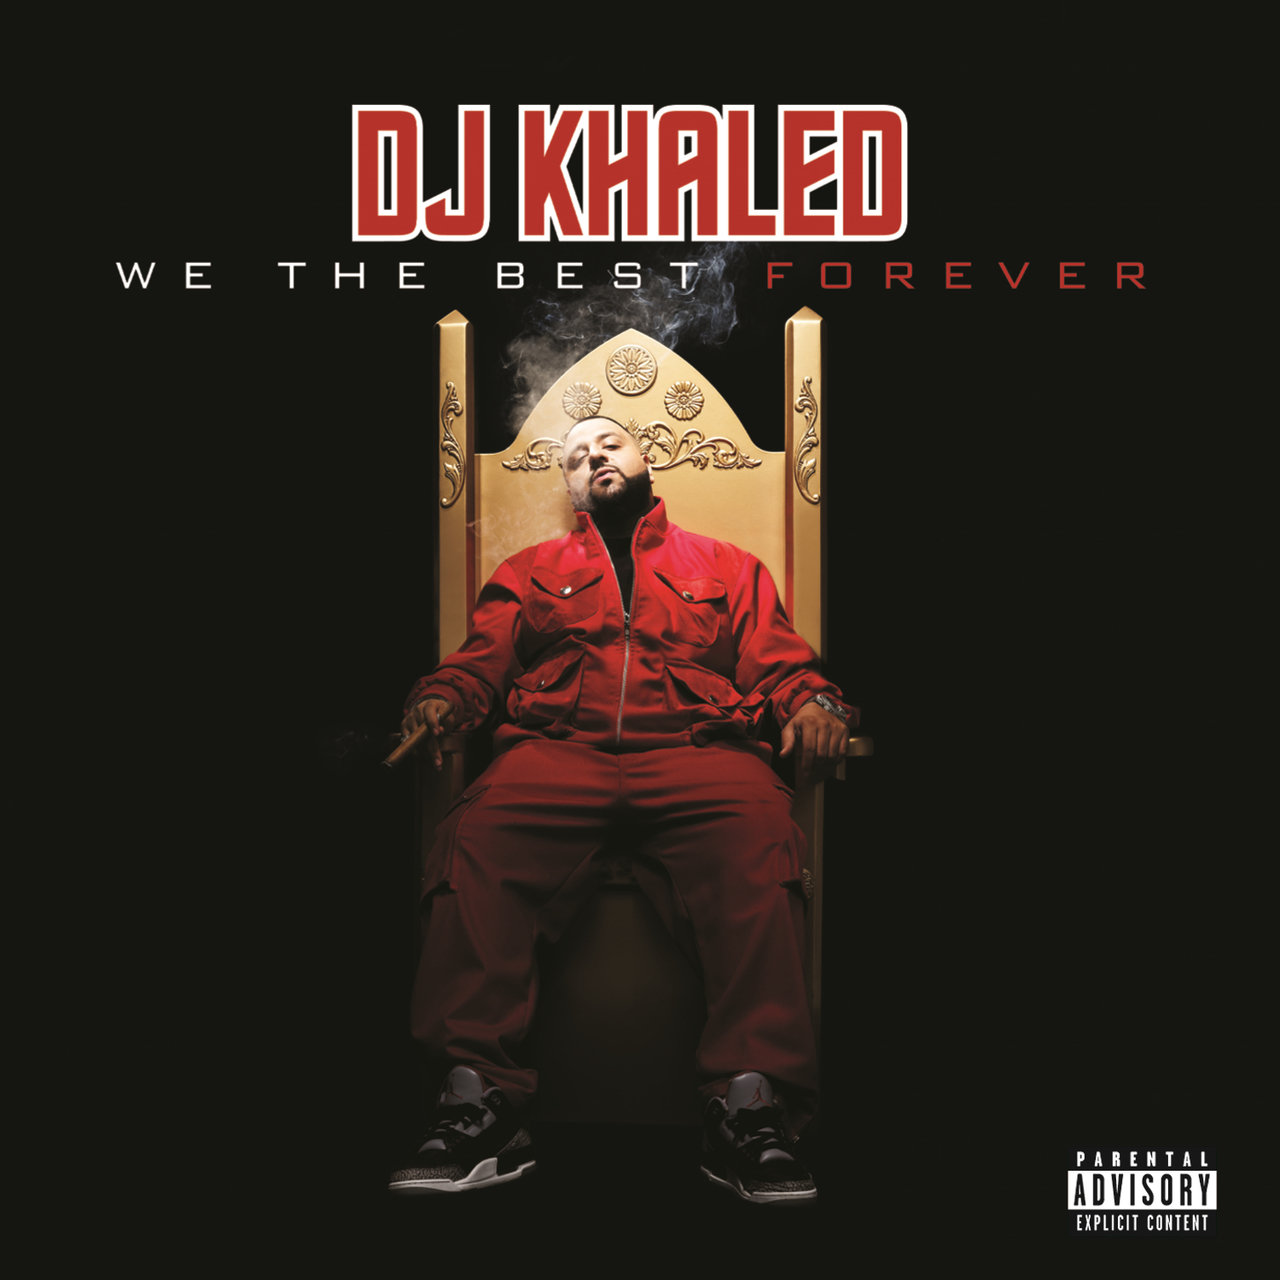 DJ Khaled - We The Best Forever (Cover)